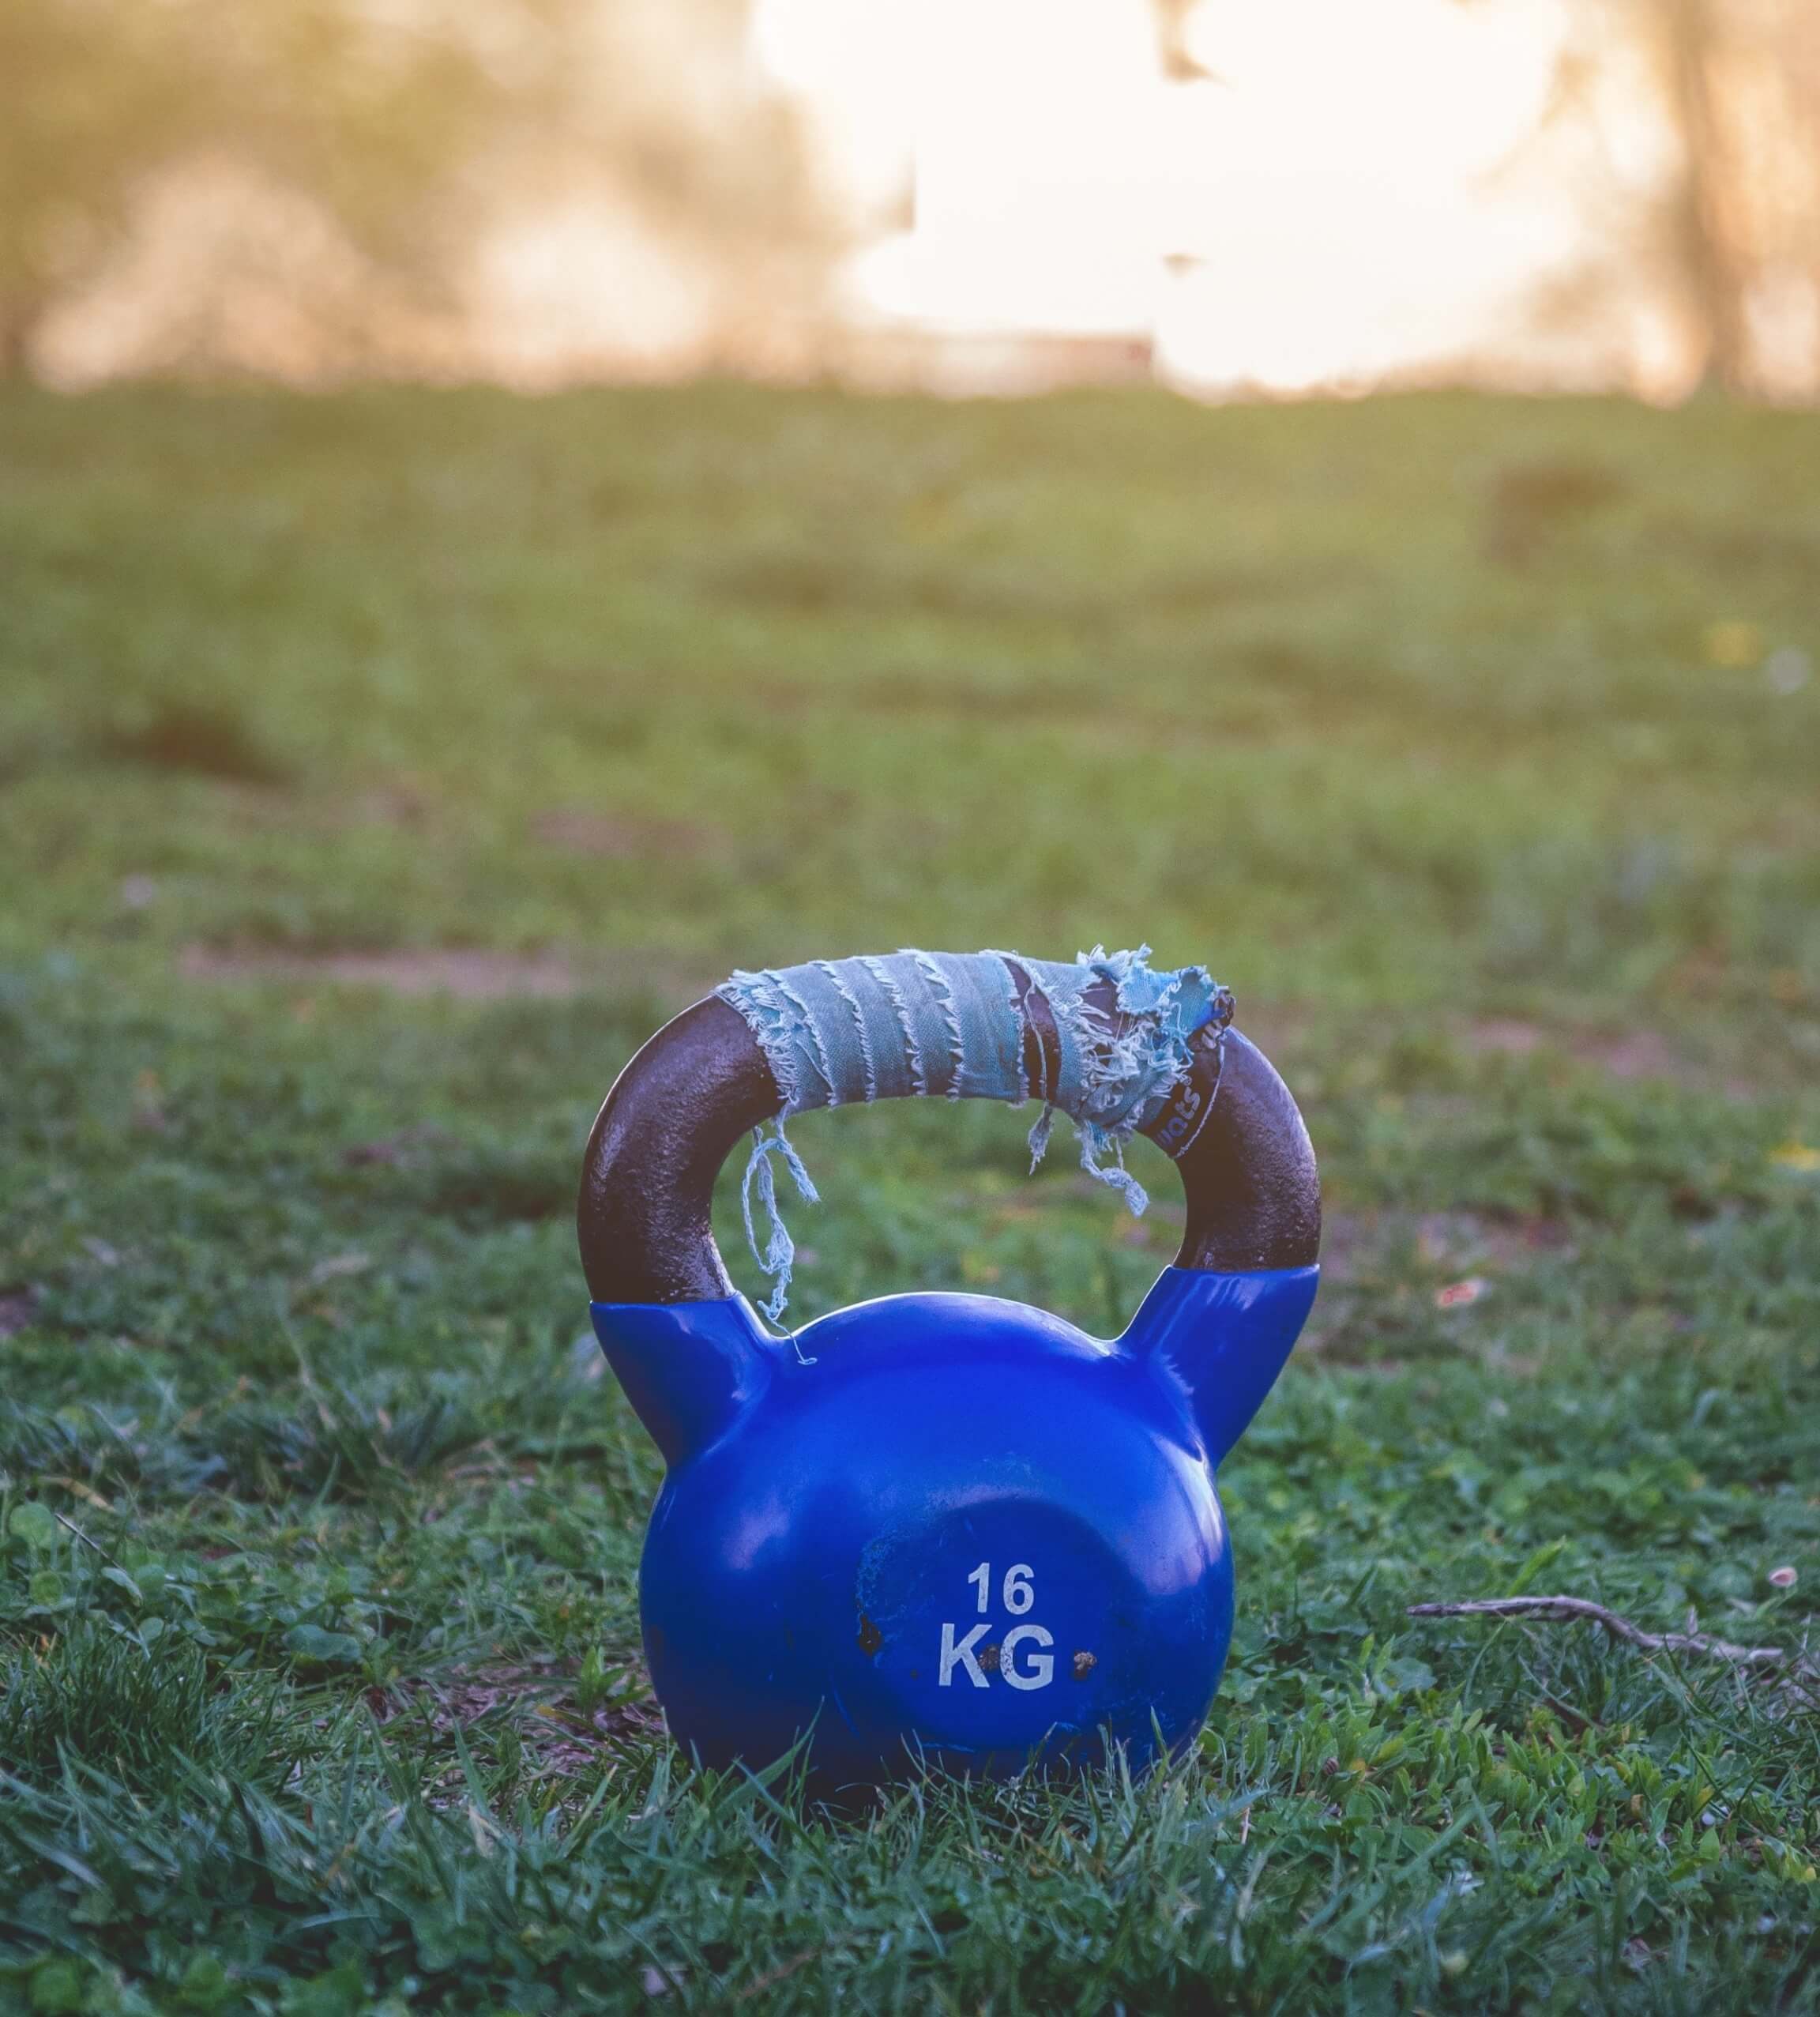 Kettlebell workouts are great for building endurance in runners.